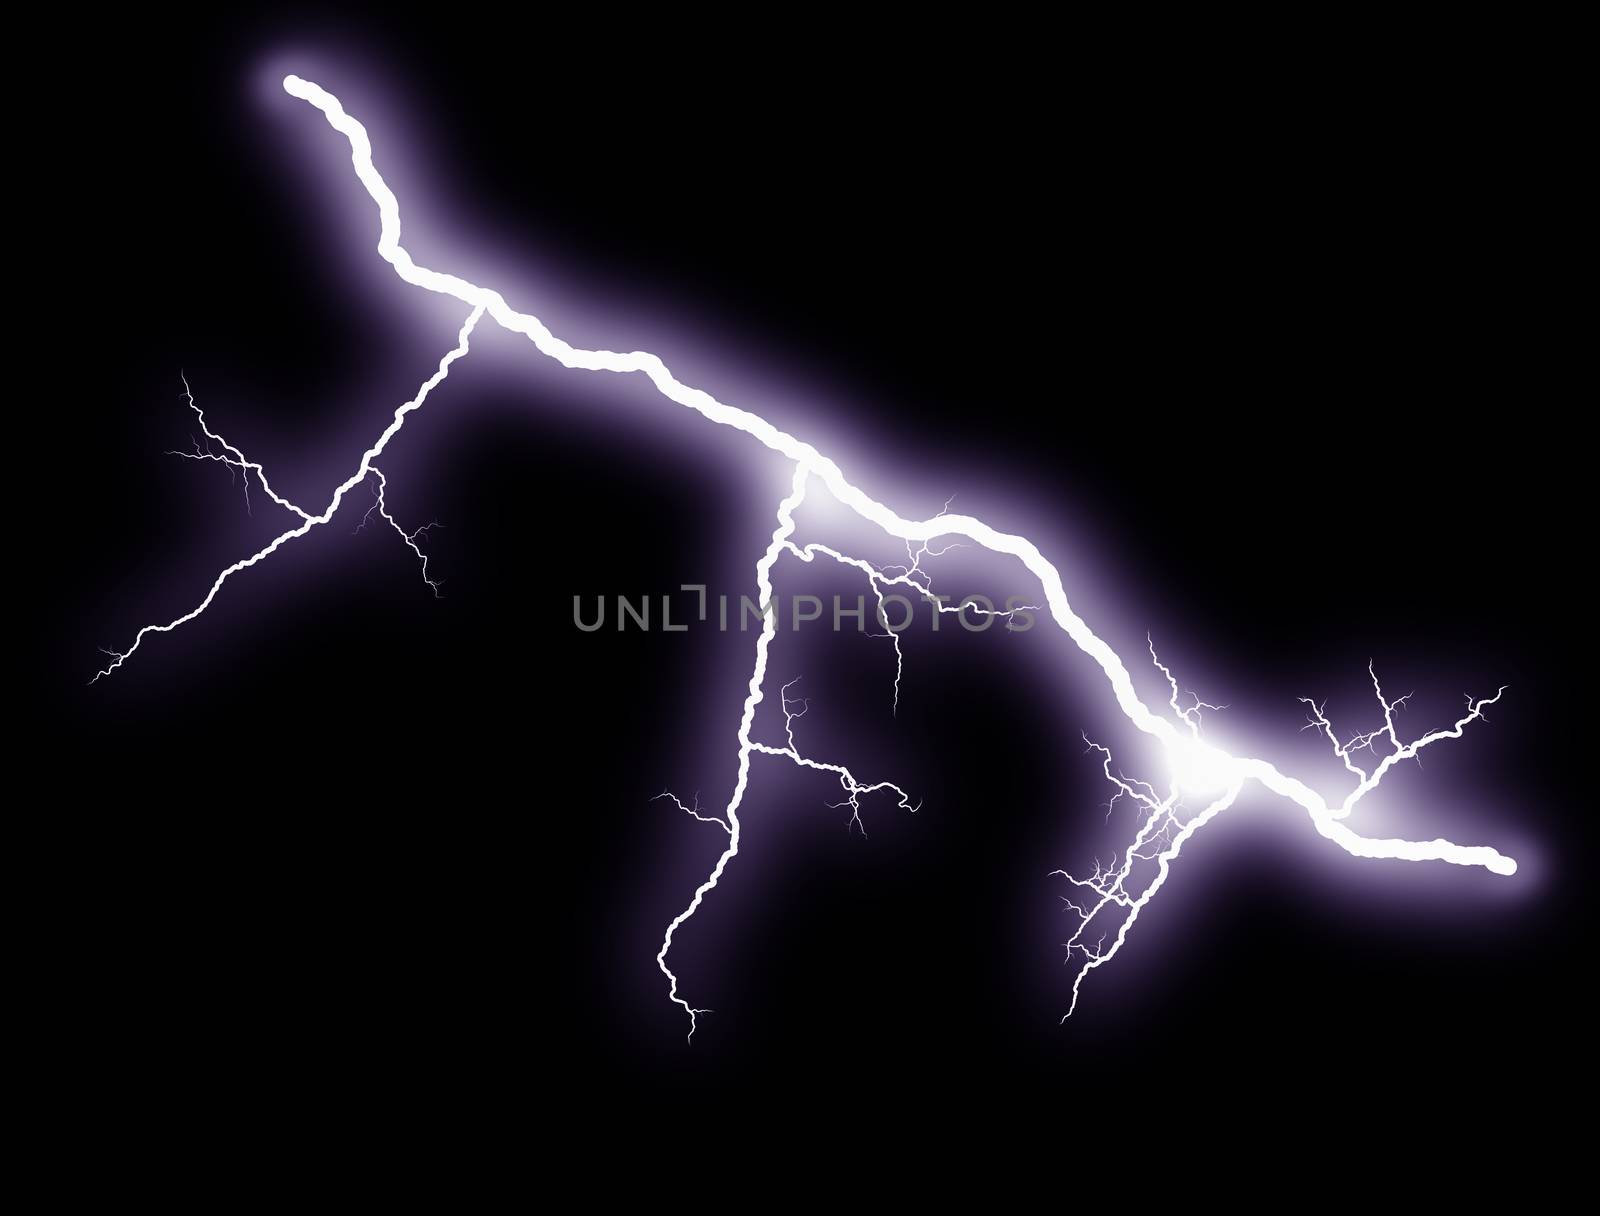 Lightning bolts at night show the power and beauty of an electrical arc by sfinks